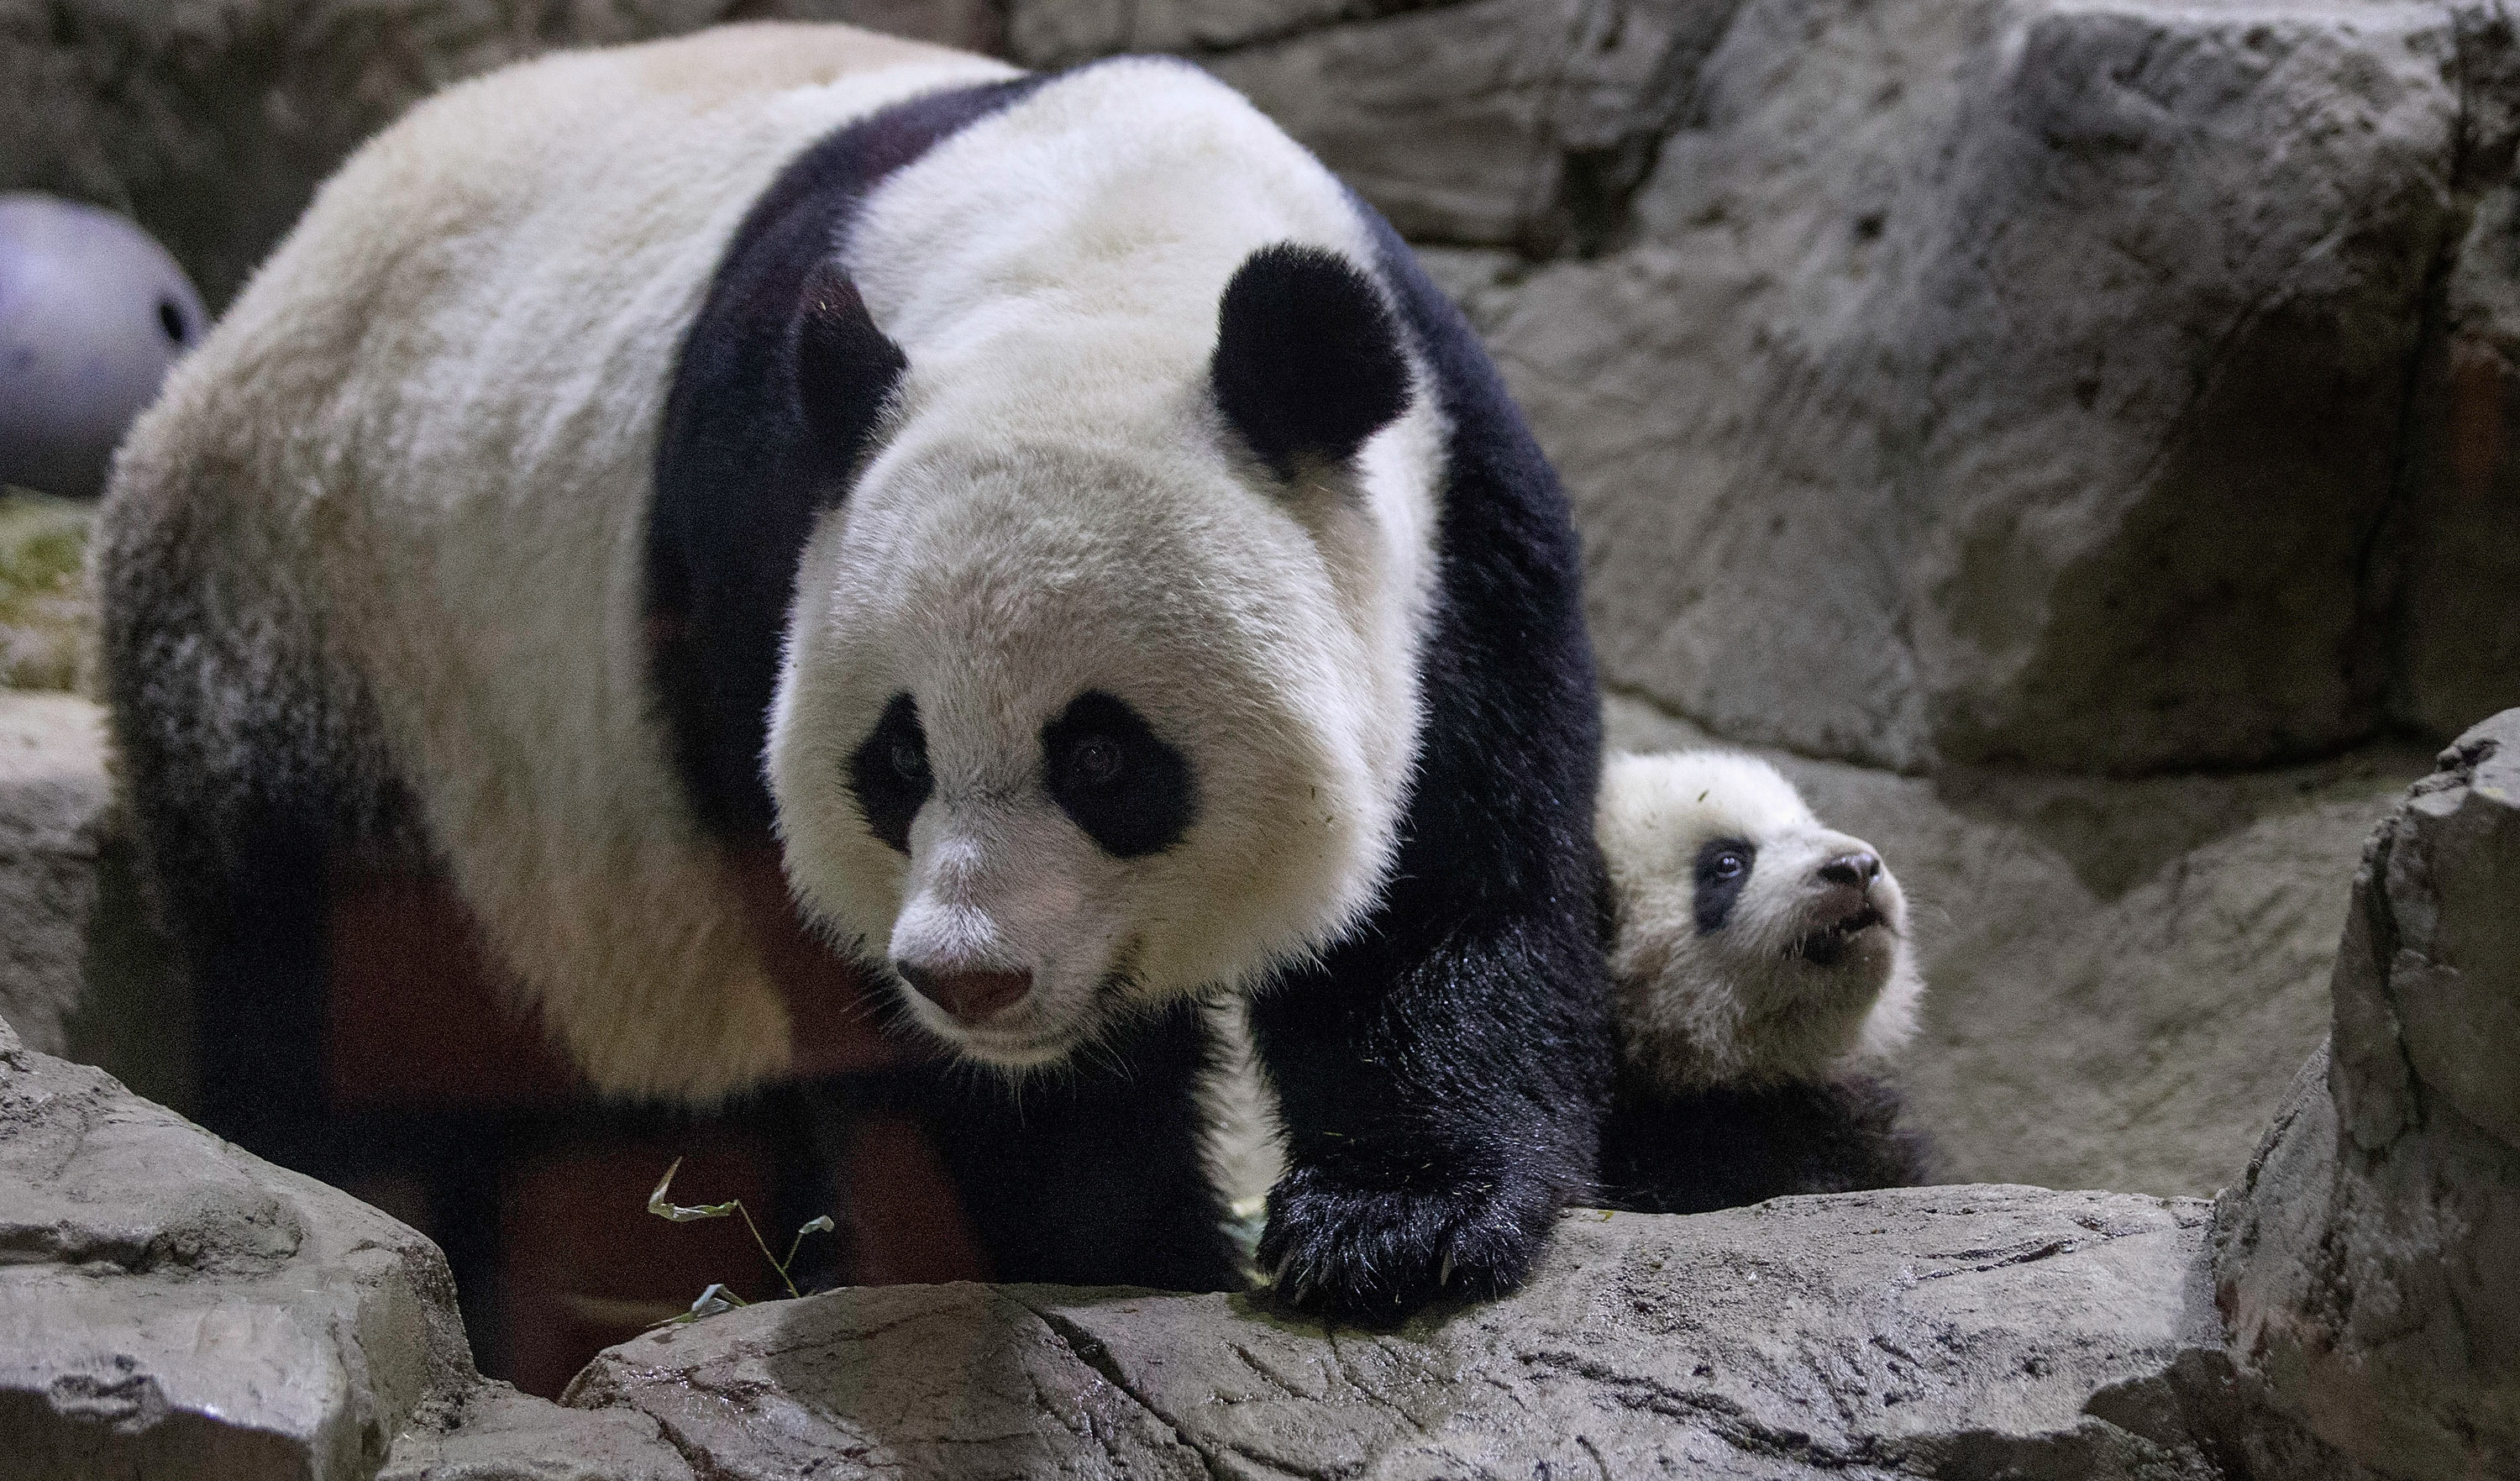 Giant Panda At National Zoo Gives Birth To Two Live Cubs | NCPR News